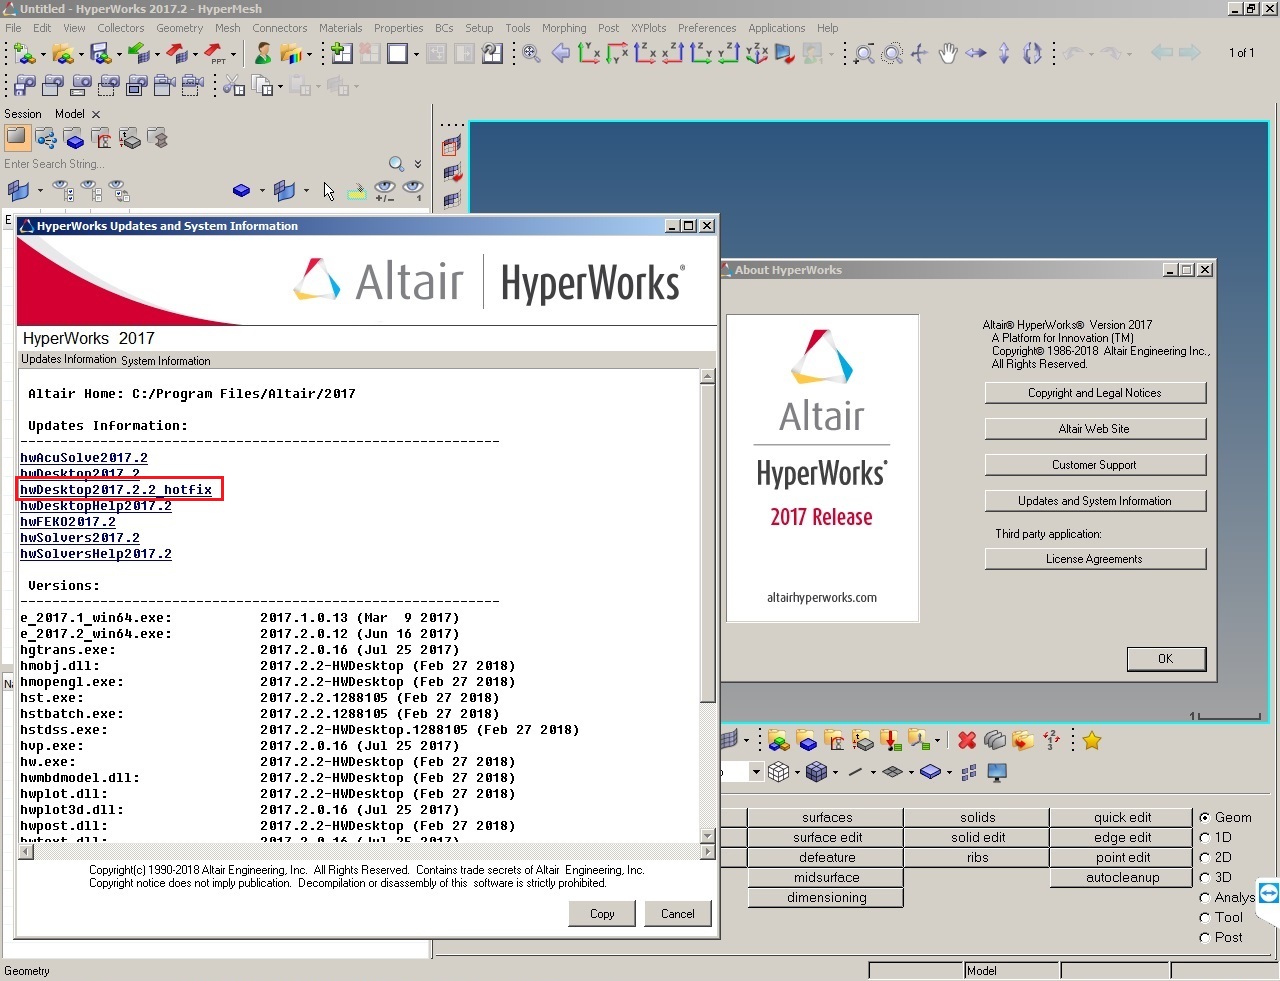 Working with Altair HyperWorks 2017.2.2 full license forever